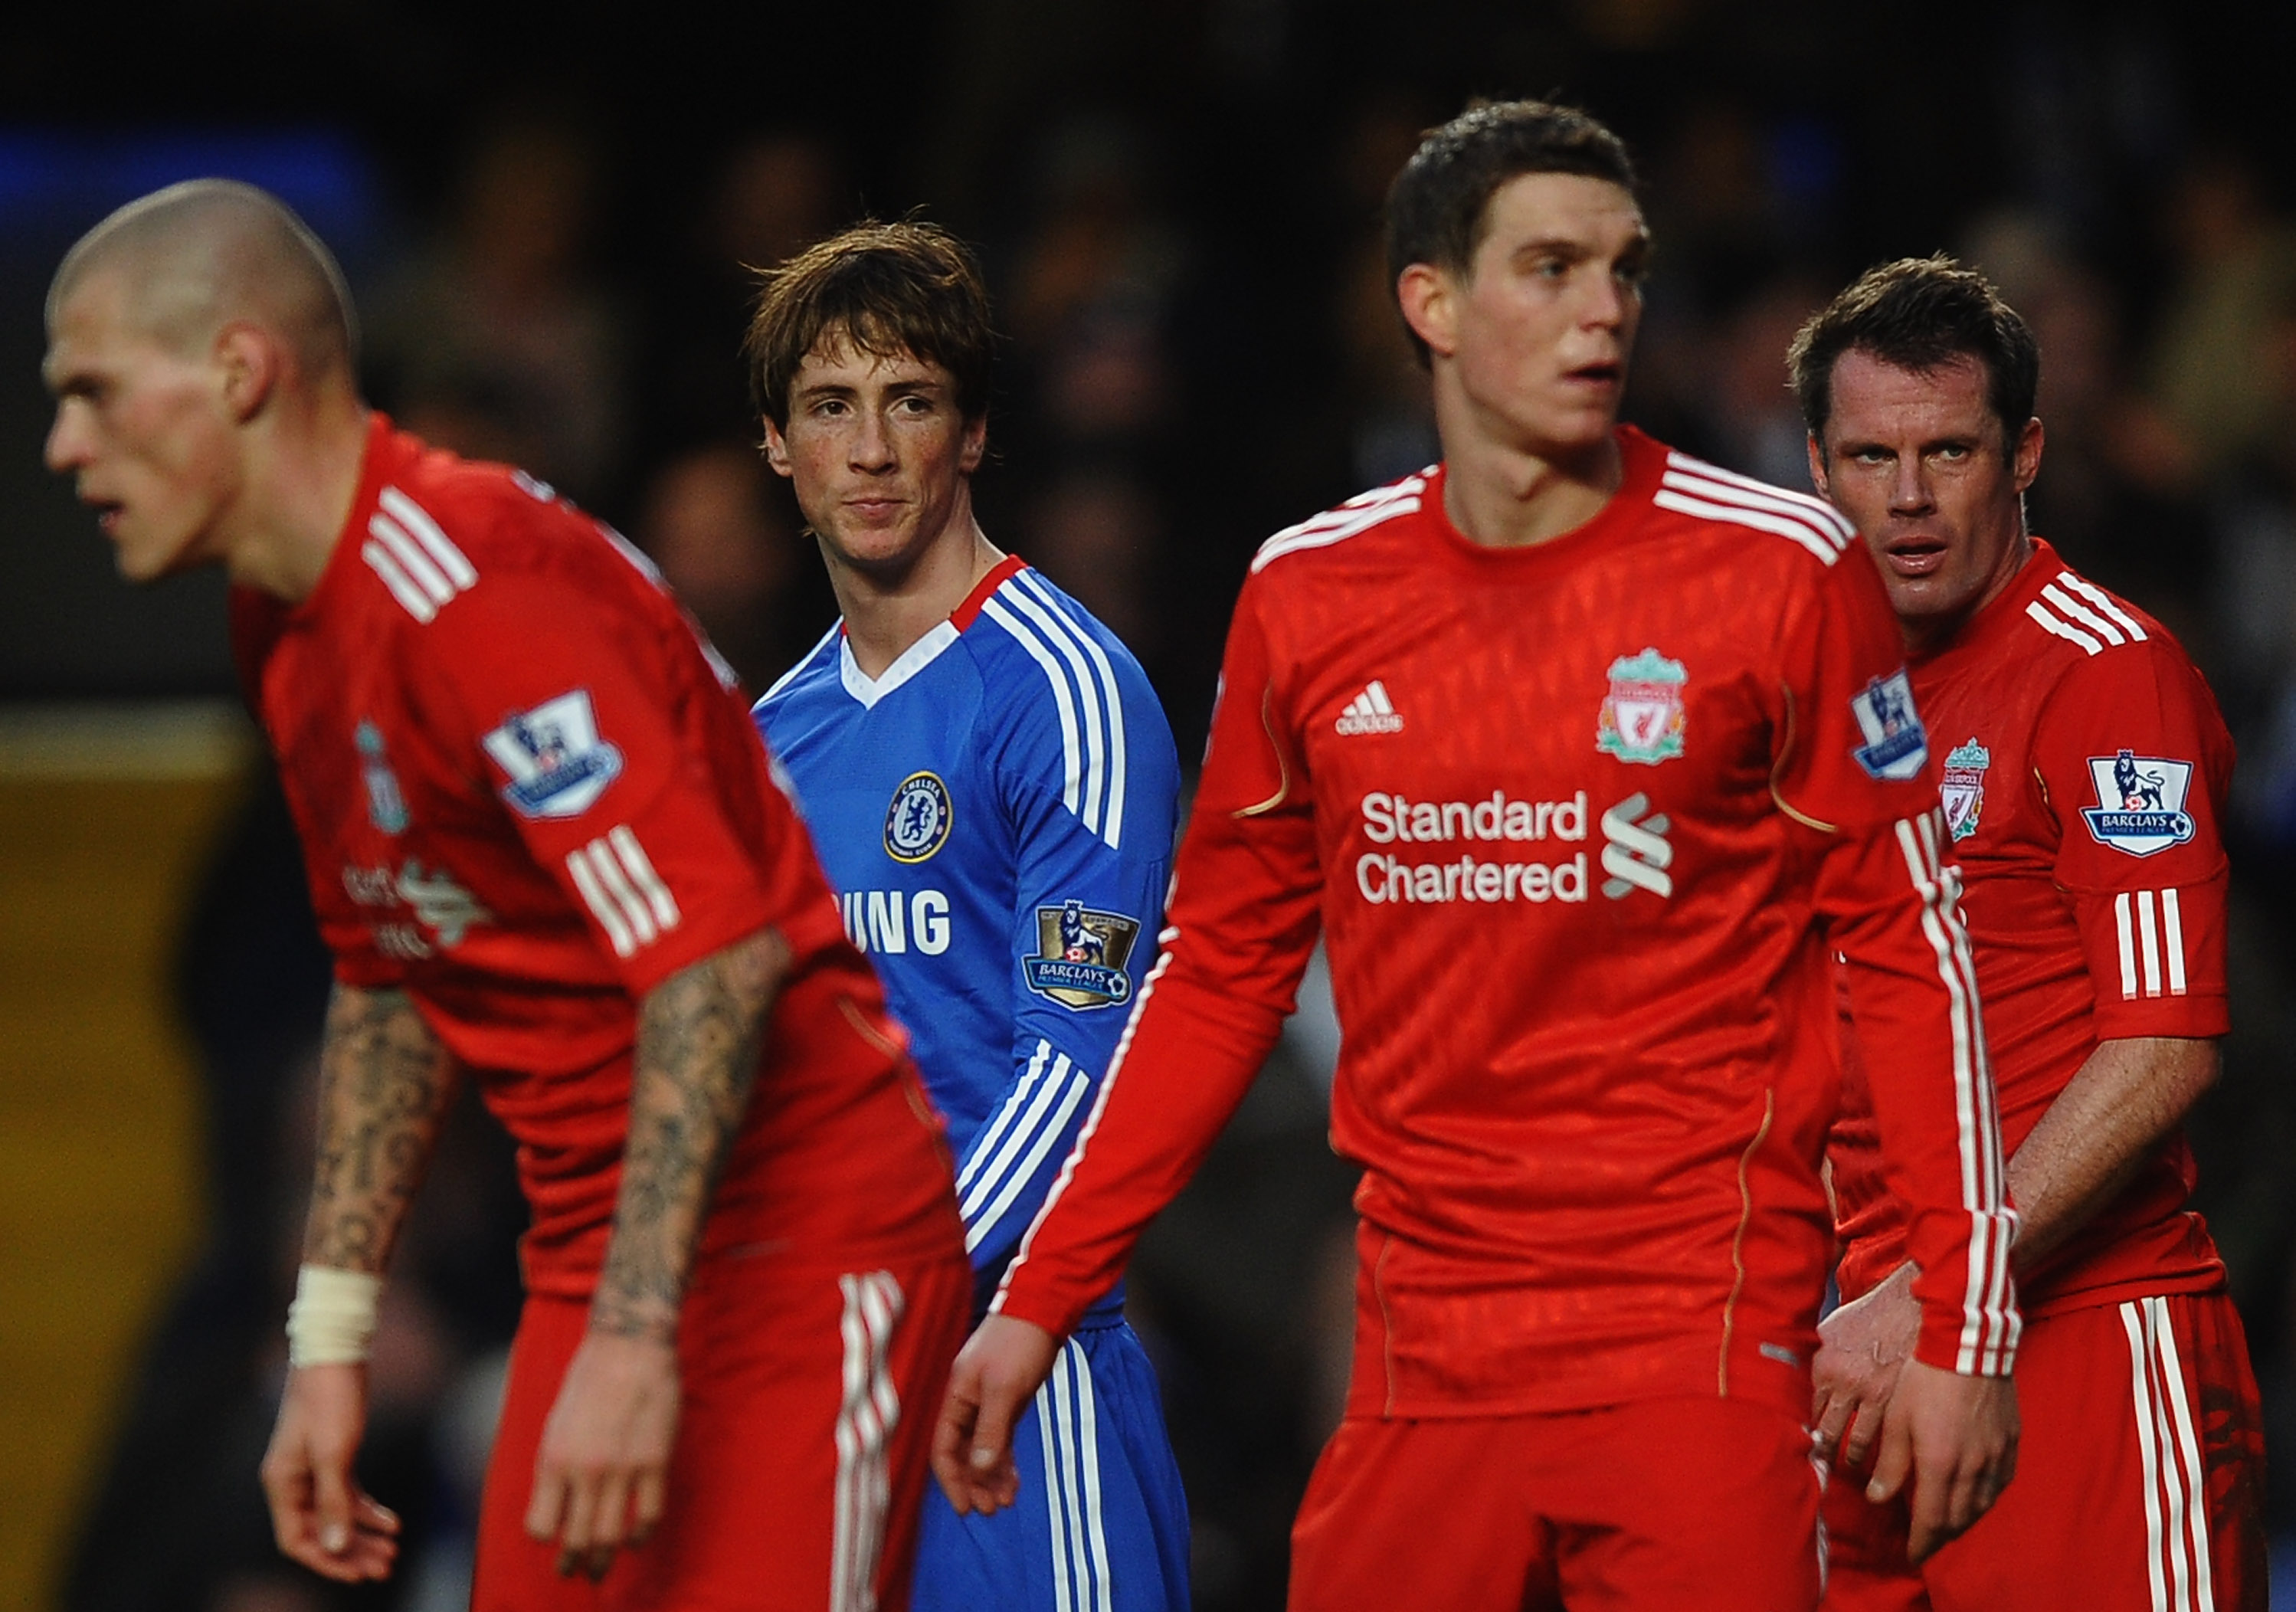 LONDON, ENGLAND - FEBRUARY 06:  Fernando Torres of Chelsea looks across a Liverpool defenders Martin Skrtel (L), Daniel Agger (2R) and Jamie Carragher )R) during the Barclays Premier League match between Chelsea and Liverpool at Stamford Bridge on Februar